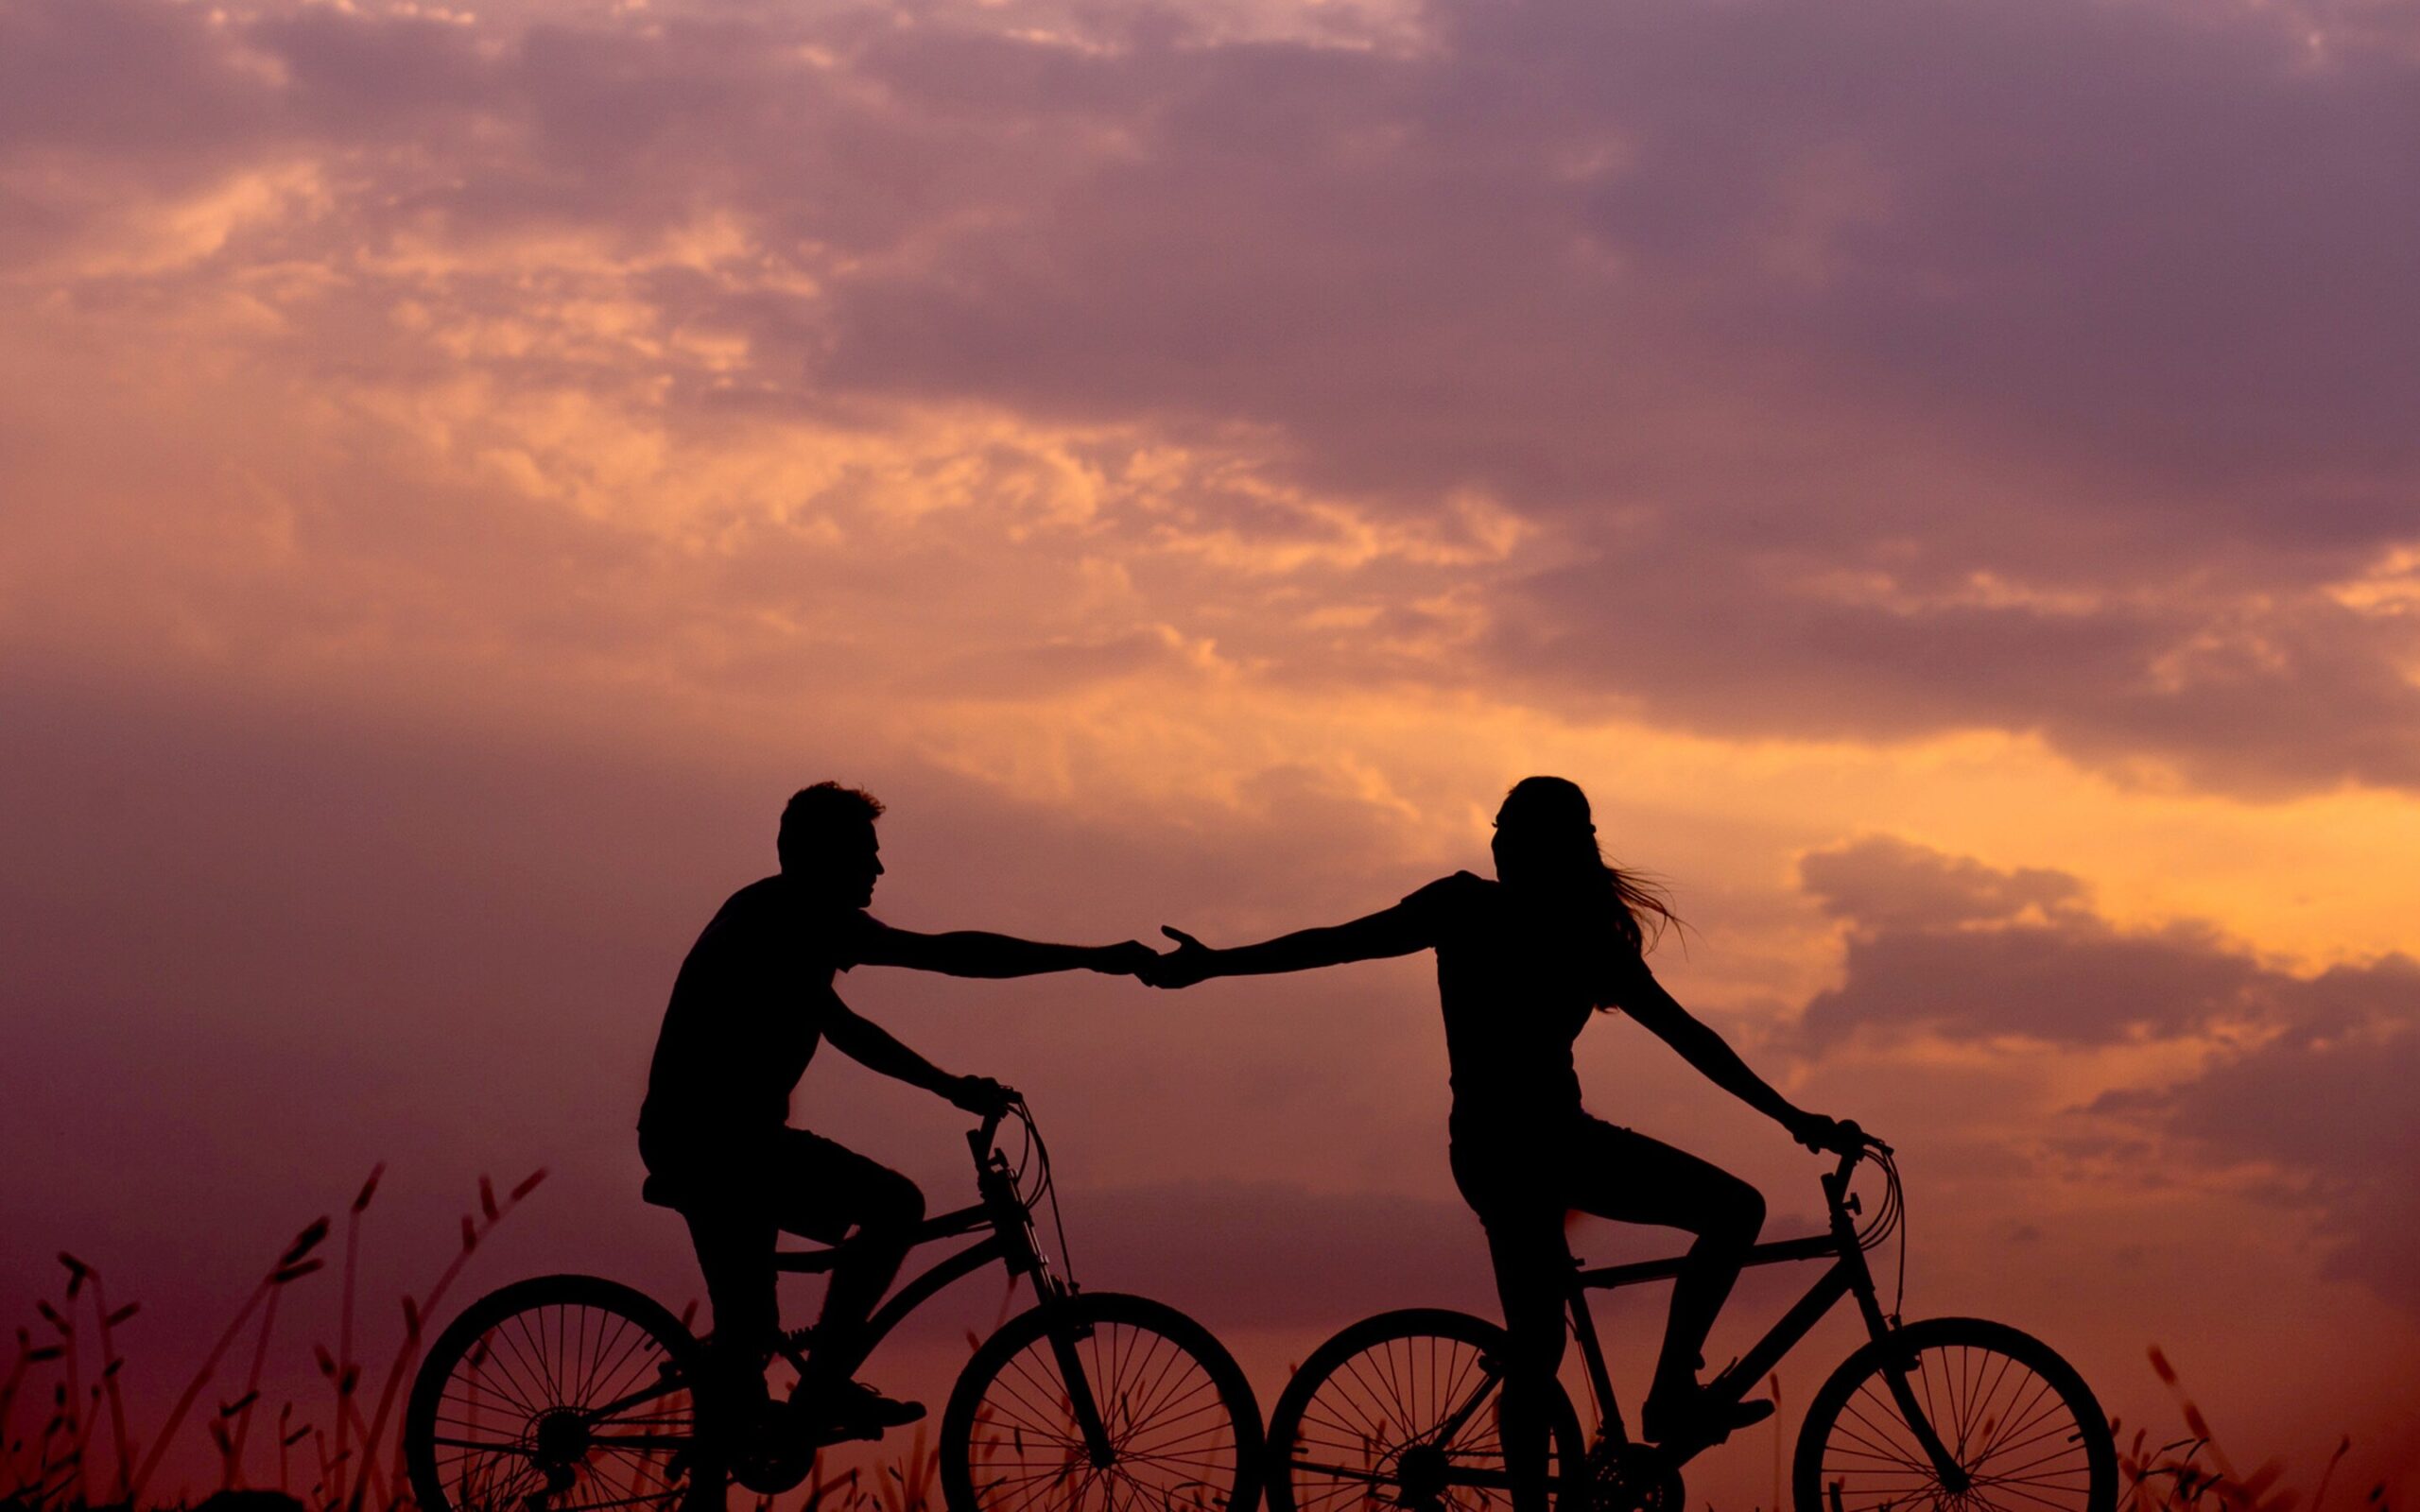 Two people ride together in sunset